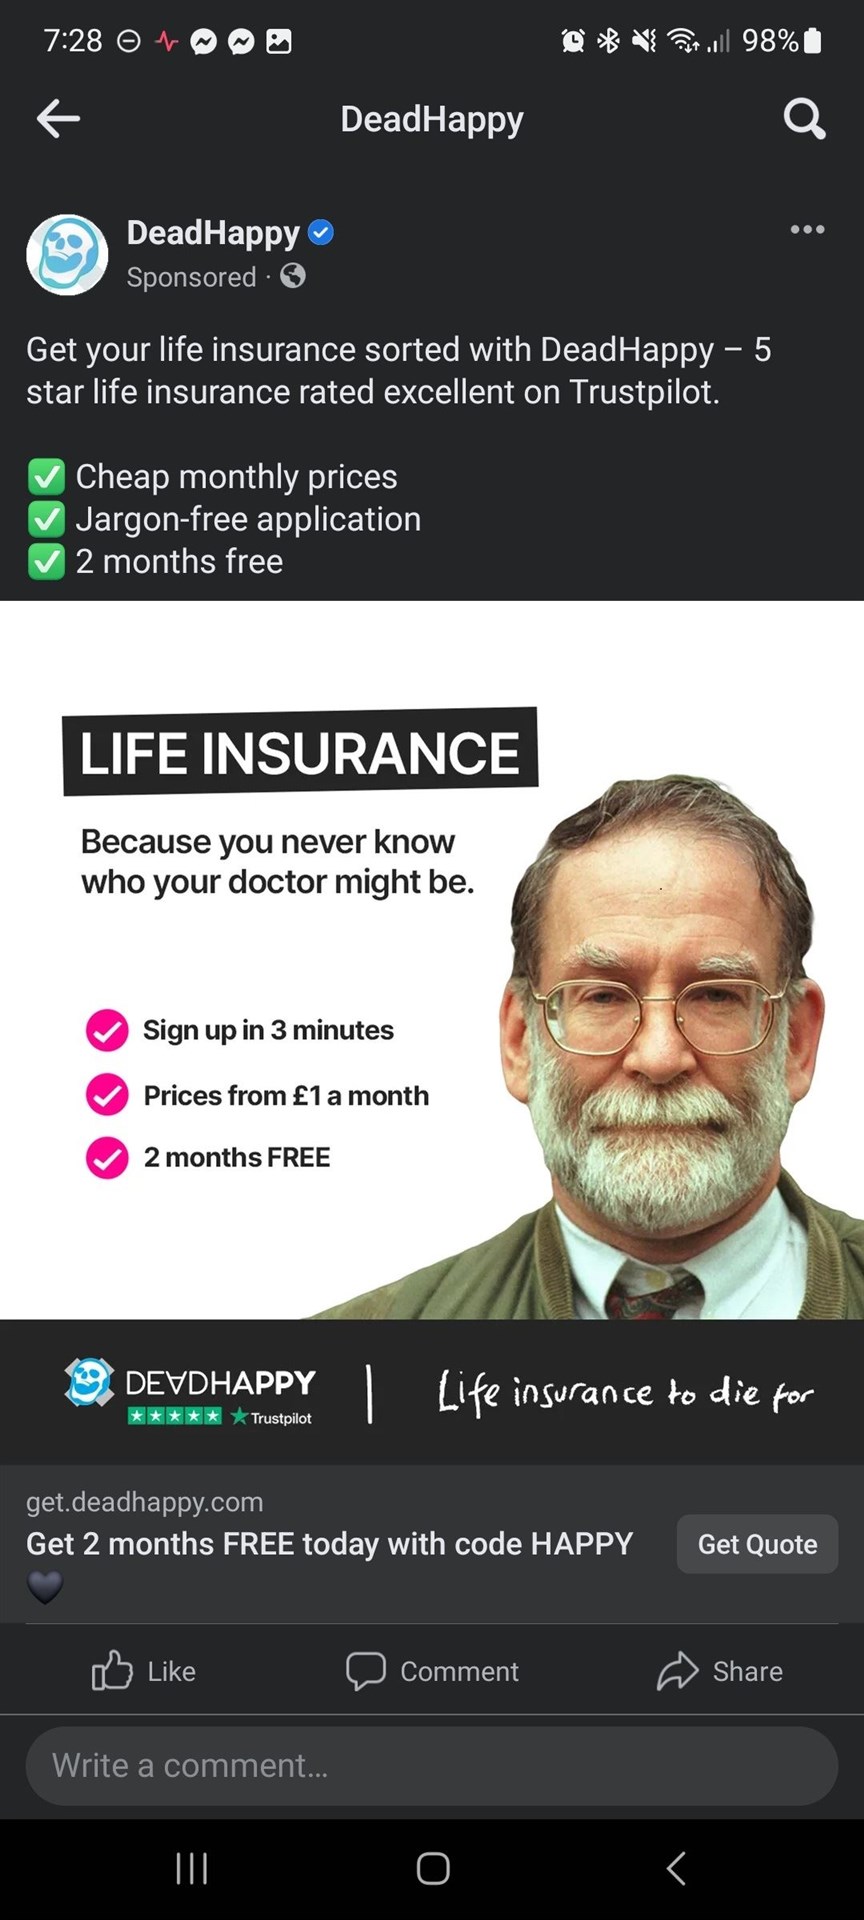 The DeadHappy ad featuring a joke about Harold Shipman that has been banned by the ASA (ASA/PA)